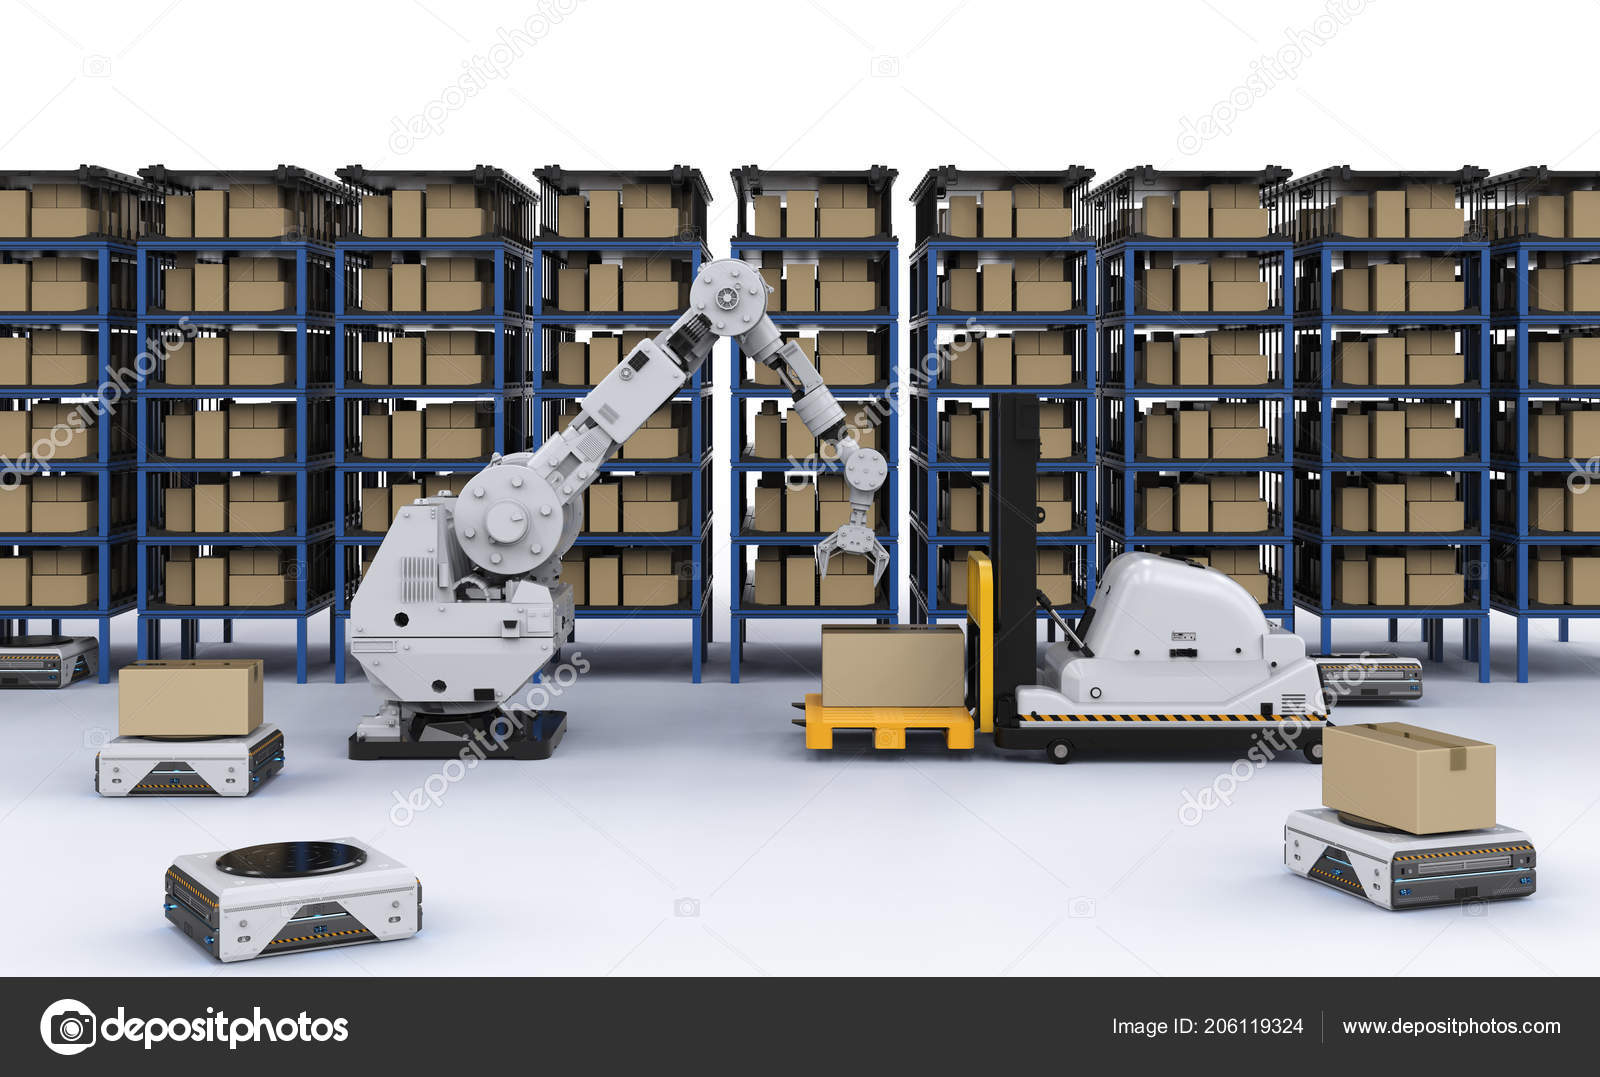 Automatic Warehouse Concept Rendering Robot Arm Forklift Truck ...